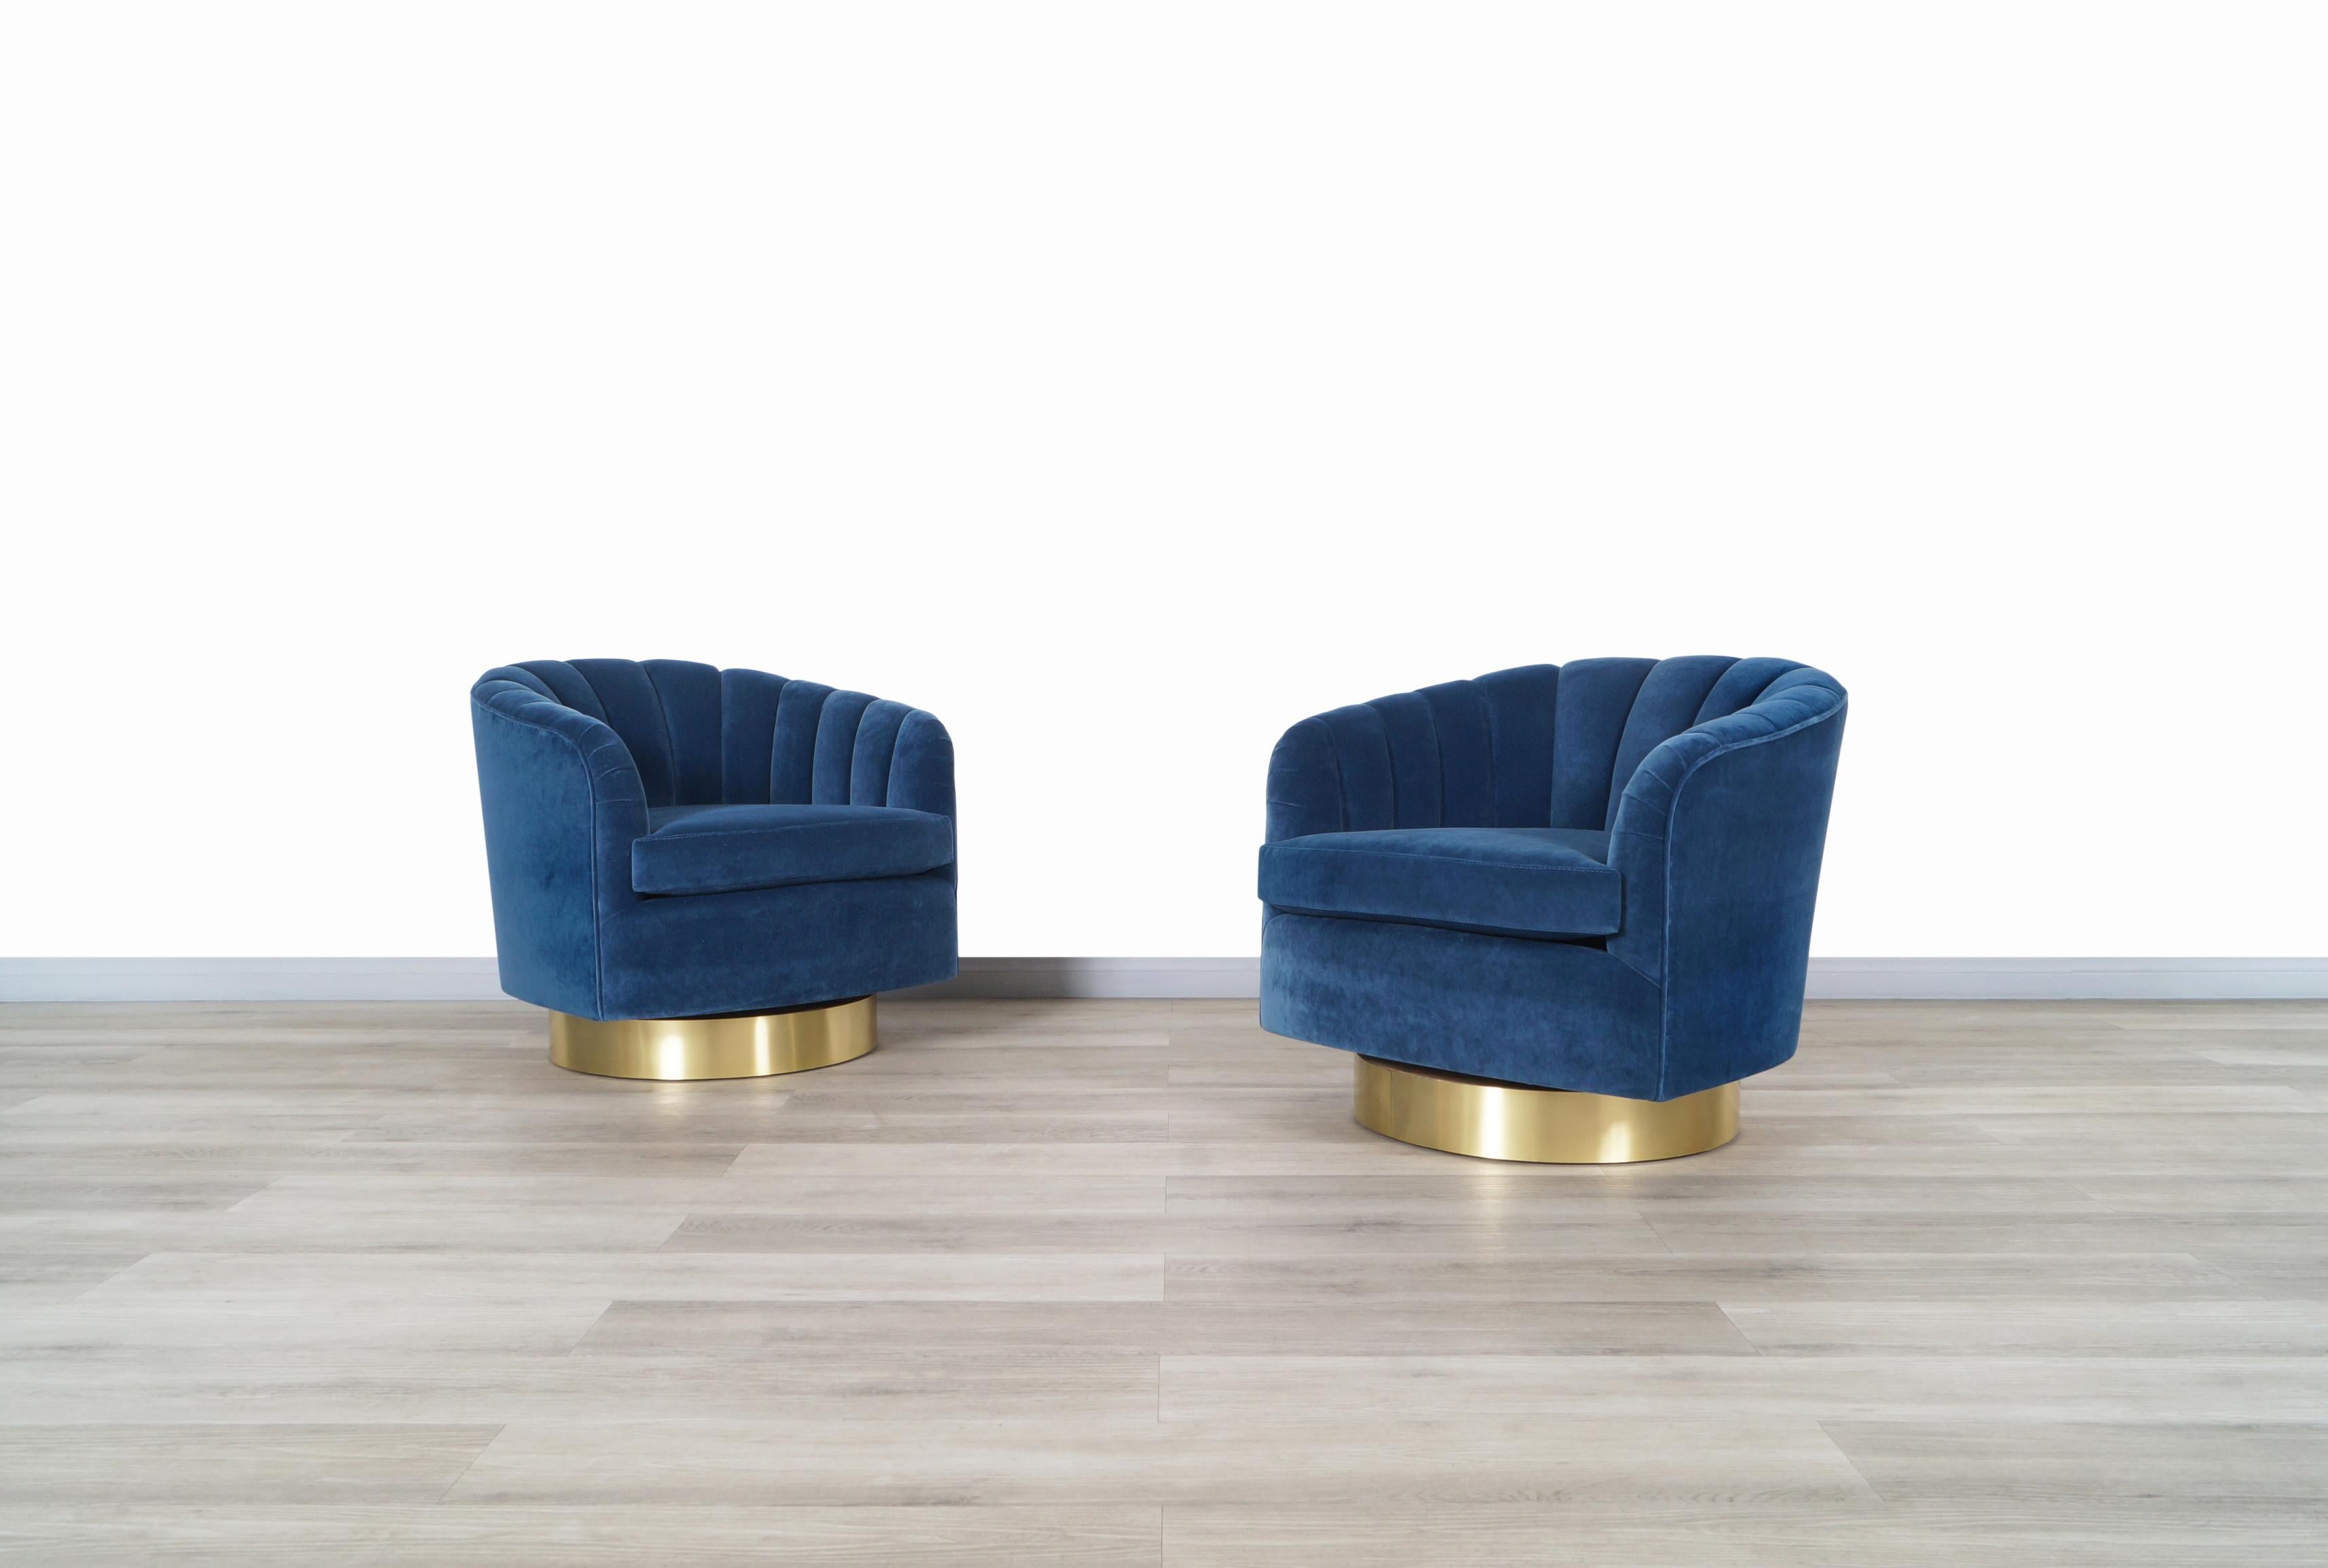 Wonderful vintage brass swivel lounge chairs designed by Milo Baughman in United States, circa 1970s. These chairs have been professionally reupholstered in soft royal blue velvet by our expert craftsmen. The circular design of the chairs makes them